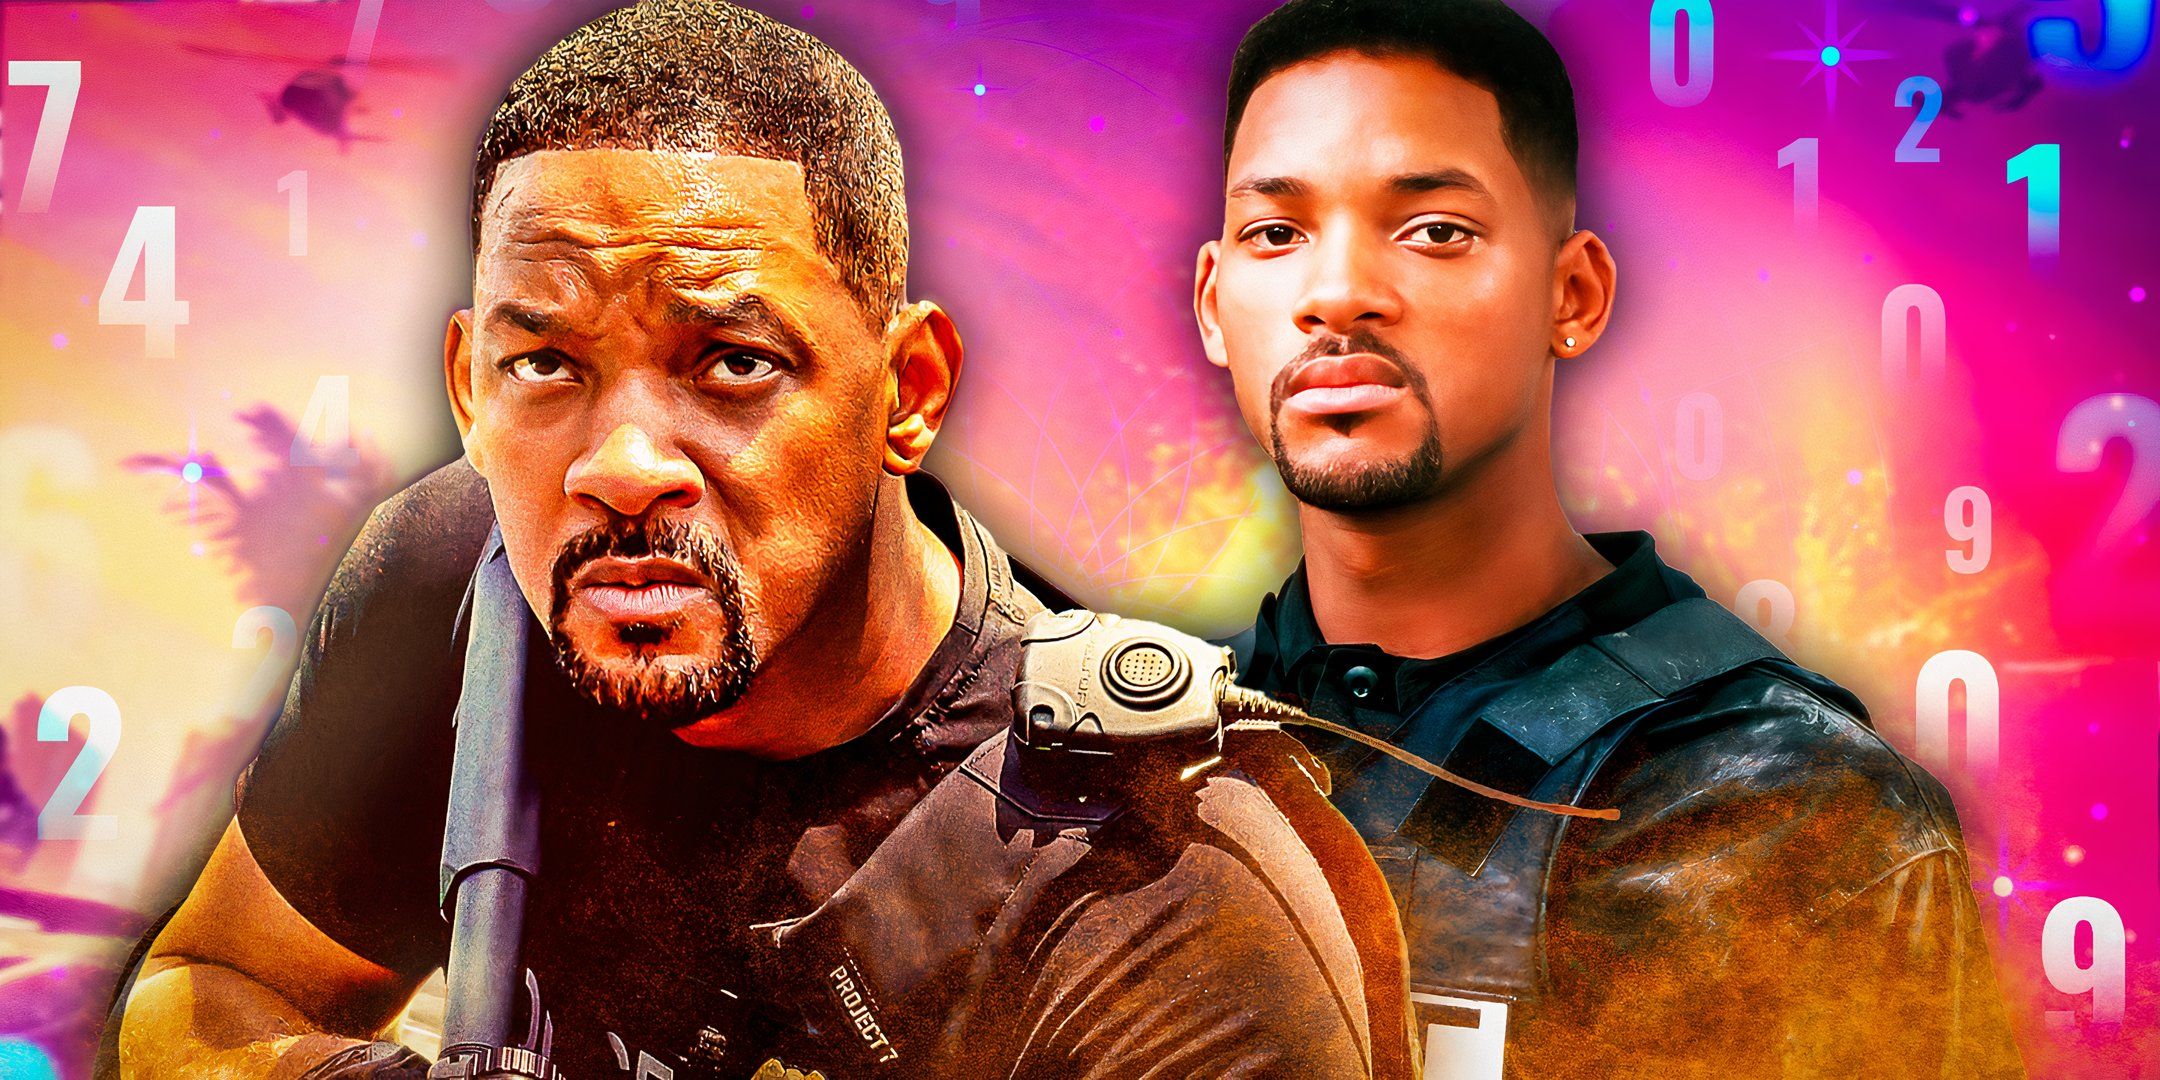 Will Smith as Mike Lowrey from the Bad Boys Franchise